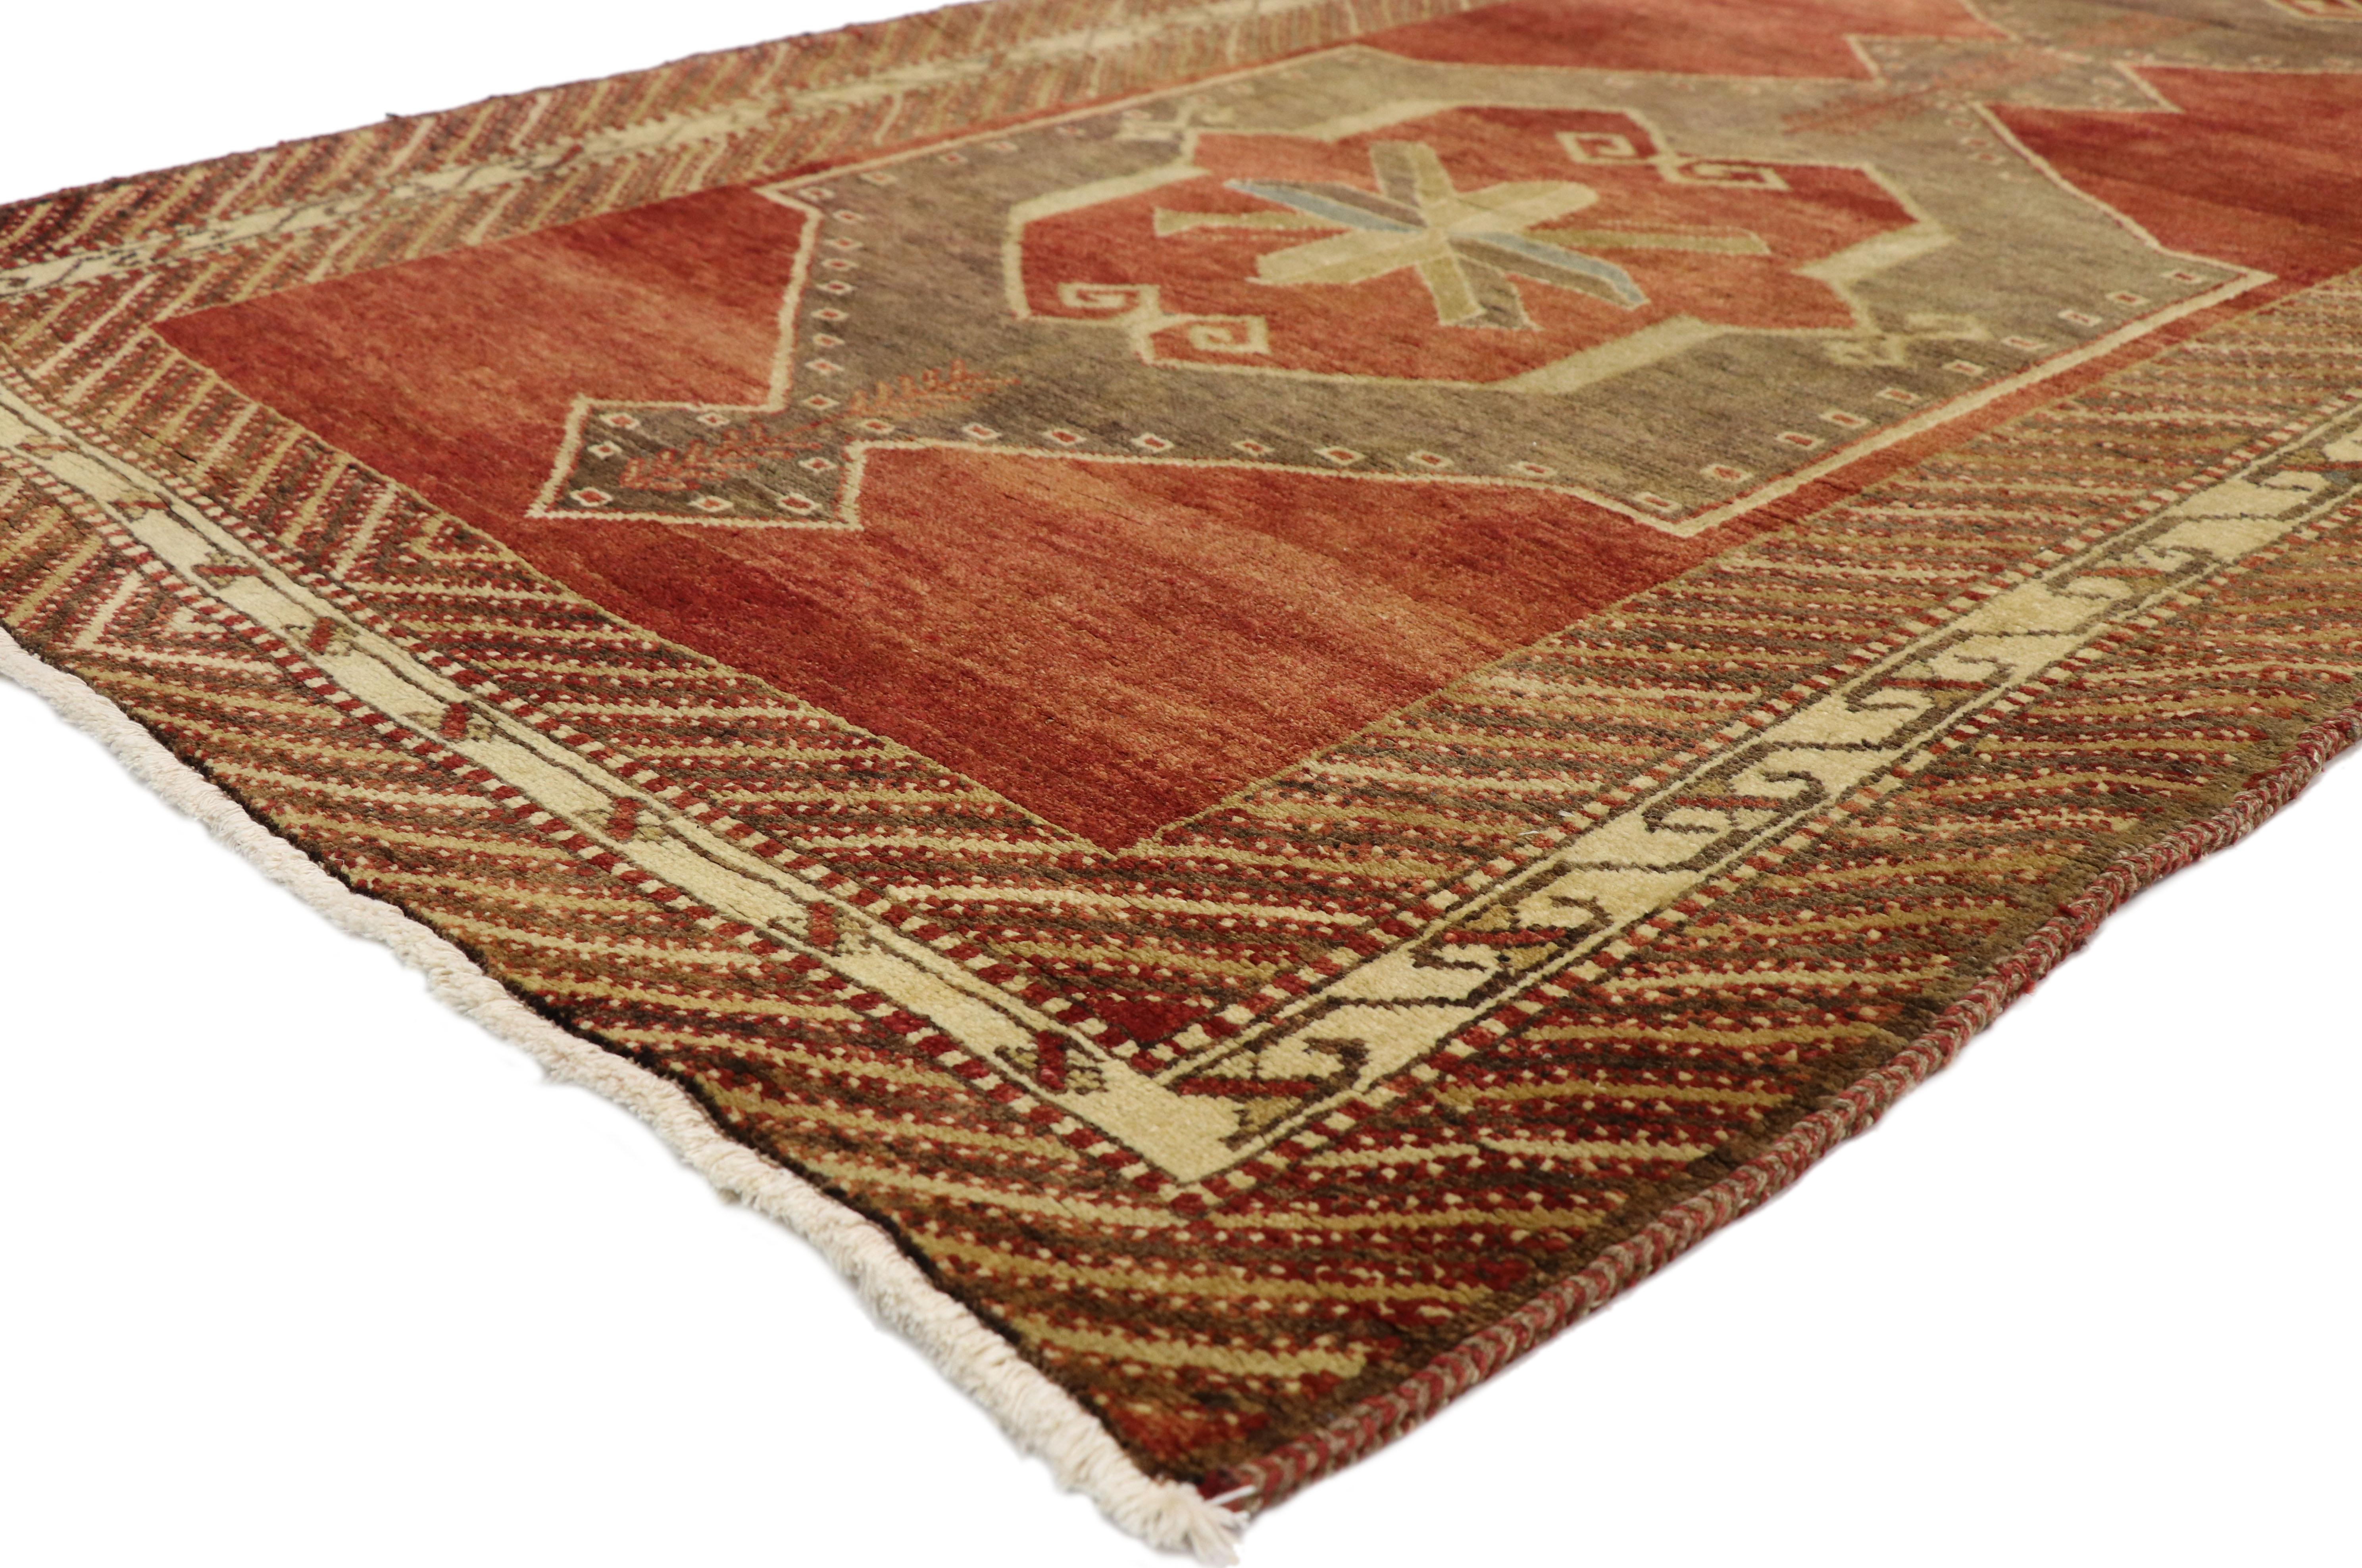 50490 Vintage Turkish Oushak Runner with Mid-Century Modern Artisan Style, Hallway Runner 03'10 X 12'00. With a bold geometric pattern and striking appeal, this hand knotted wool vintage Turkish Oushak runner can beautifully blend contemporary,